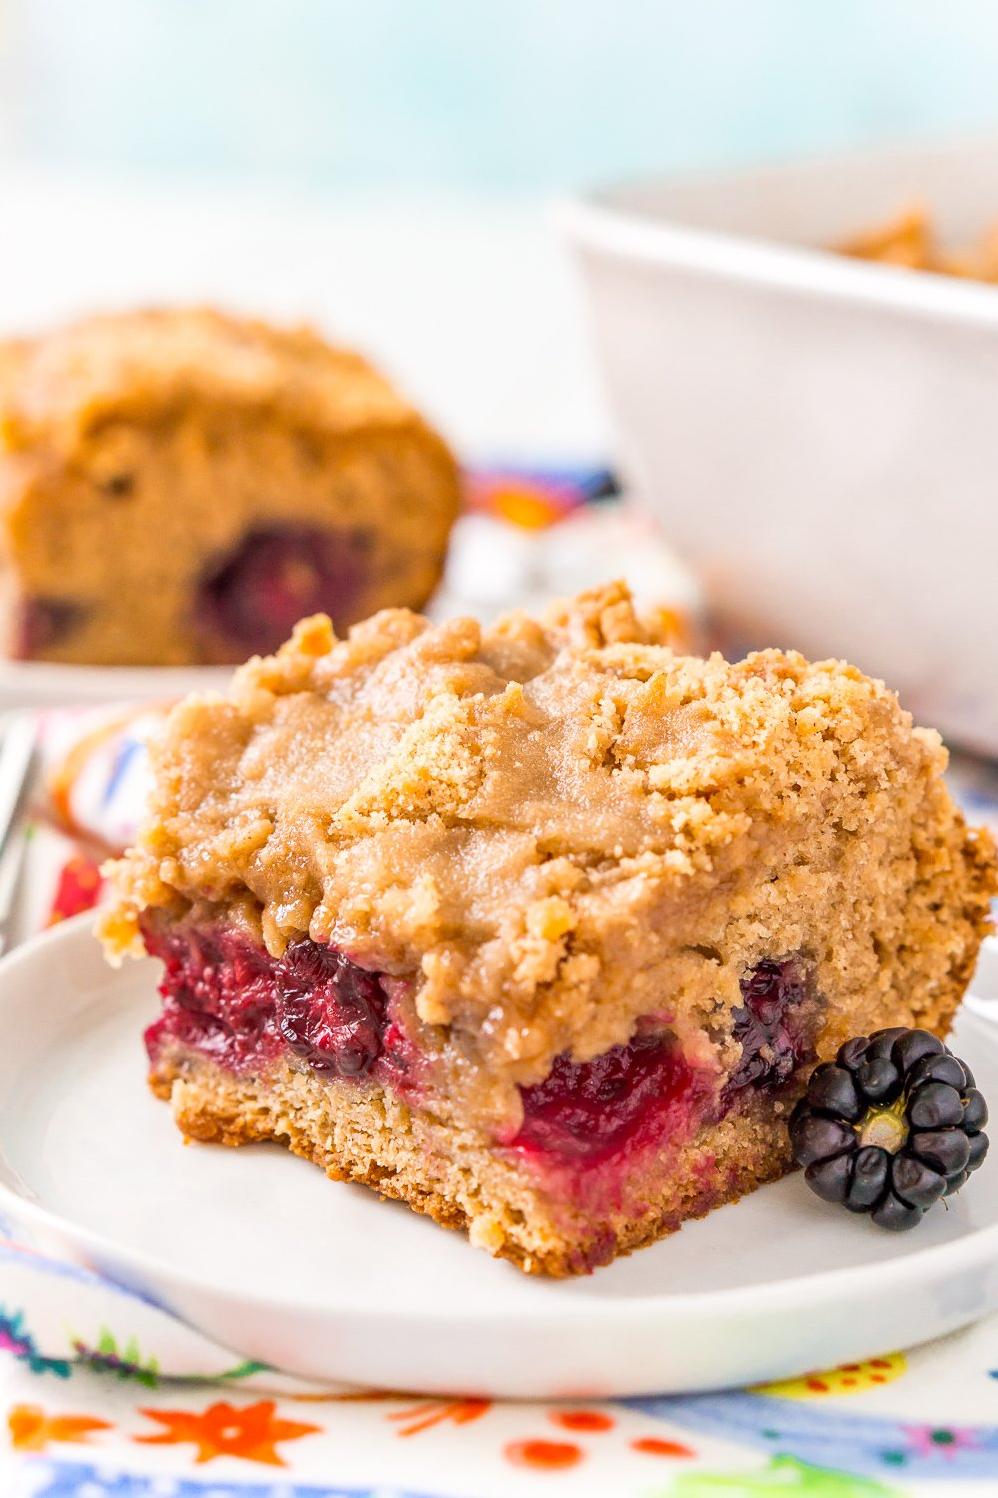  Enjoy a slice of heaven with each bite of this blackberry coffee cake